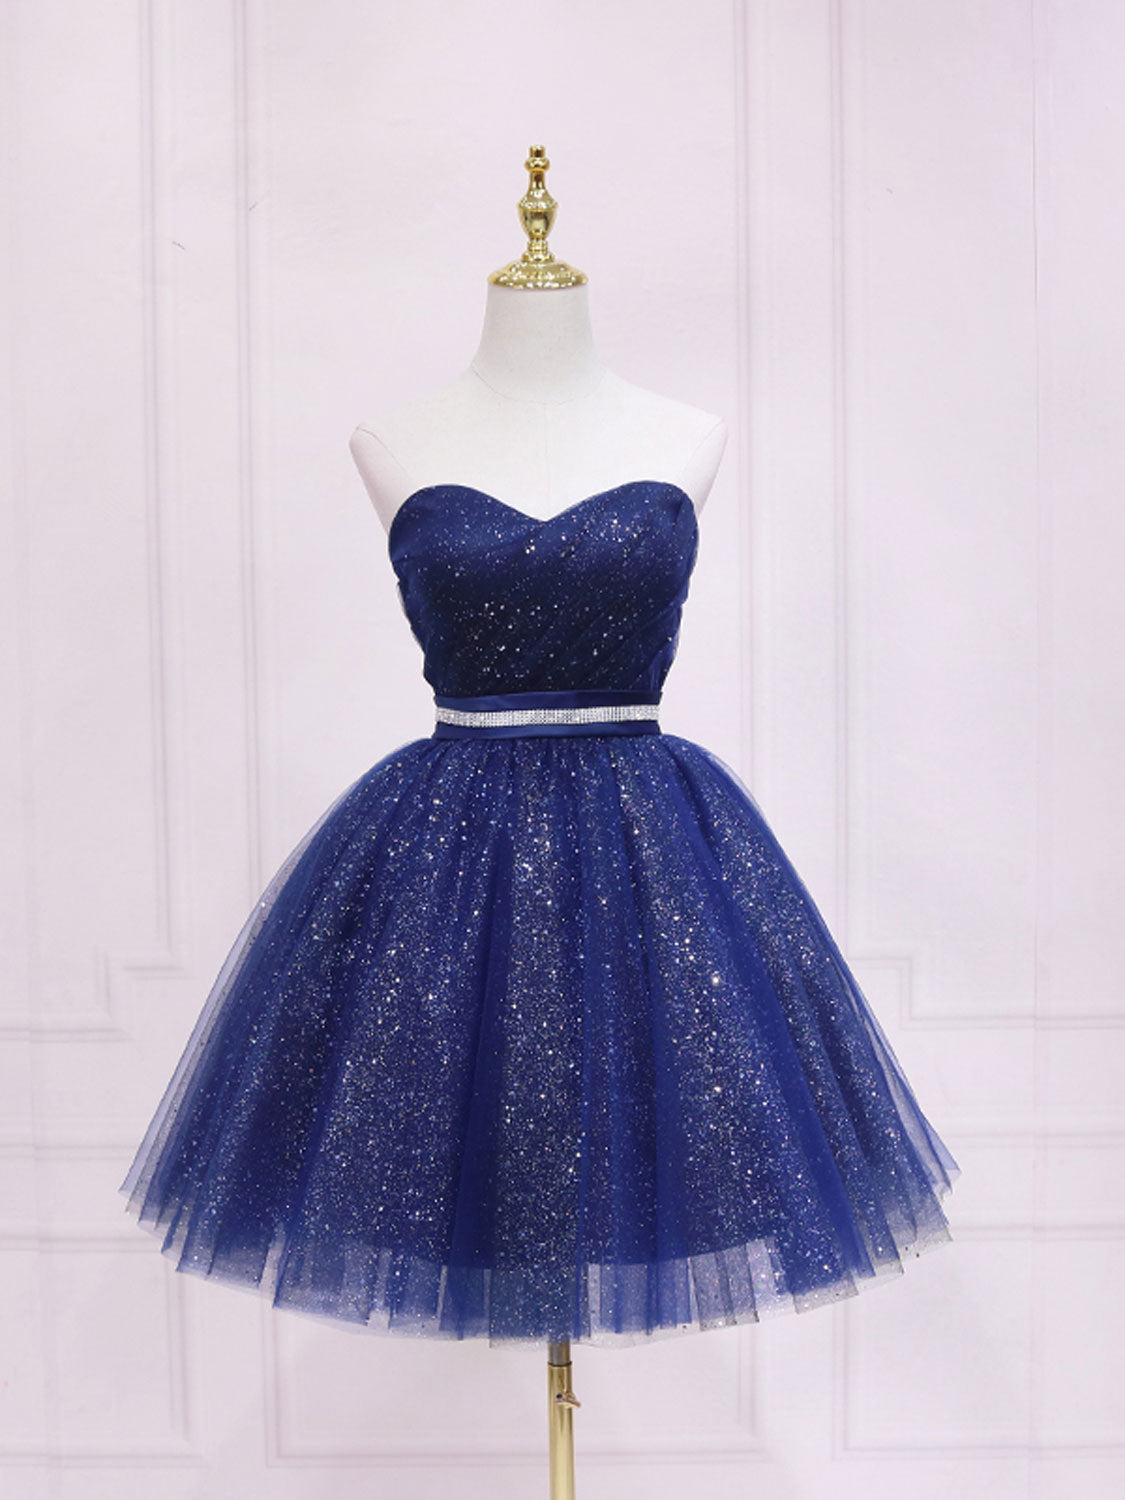 Party Dress Ideas For Curvy Figure, Dark Blue Sweetheart Neck Tulle Sequin Short Prom Dress Blue Puffy Homecoming Dress